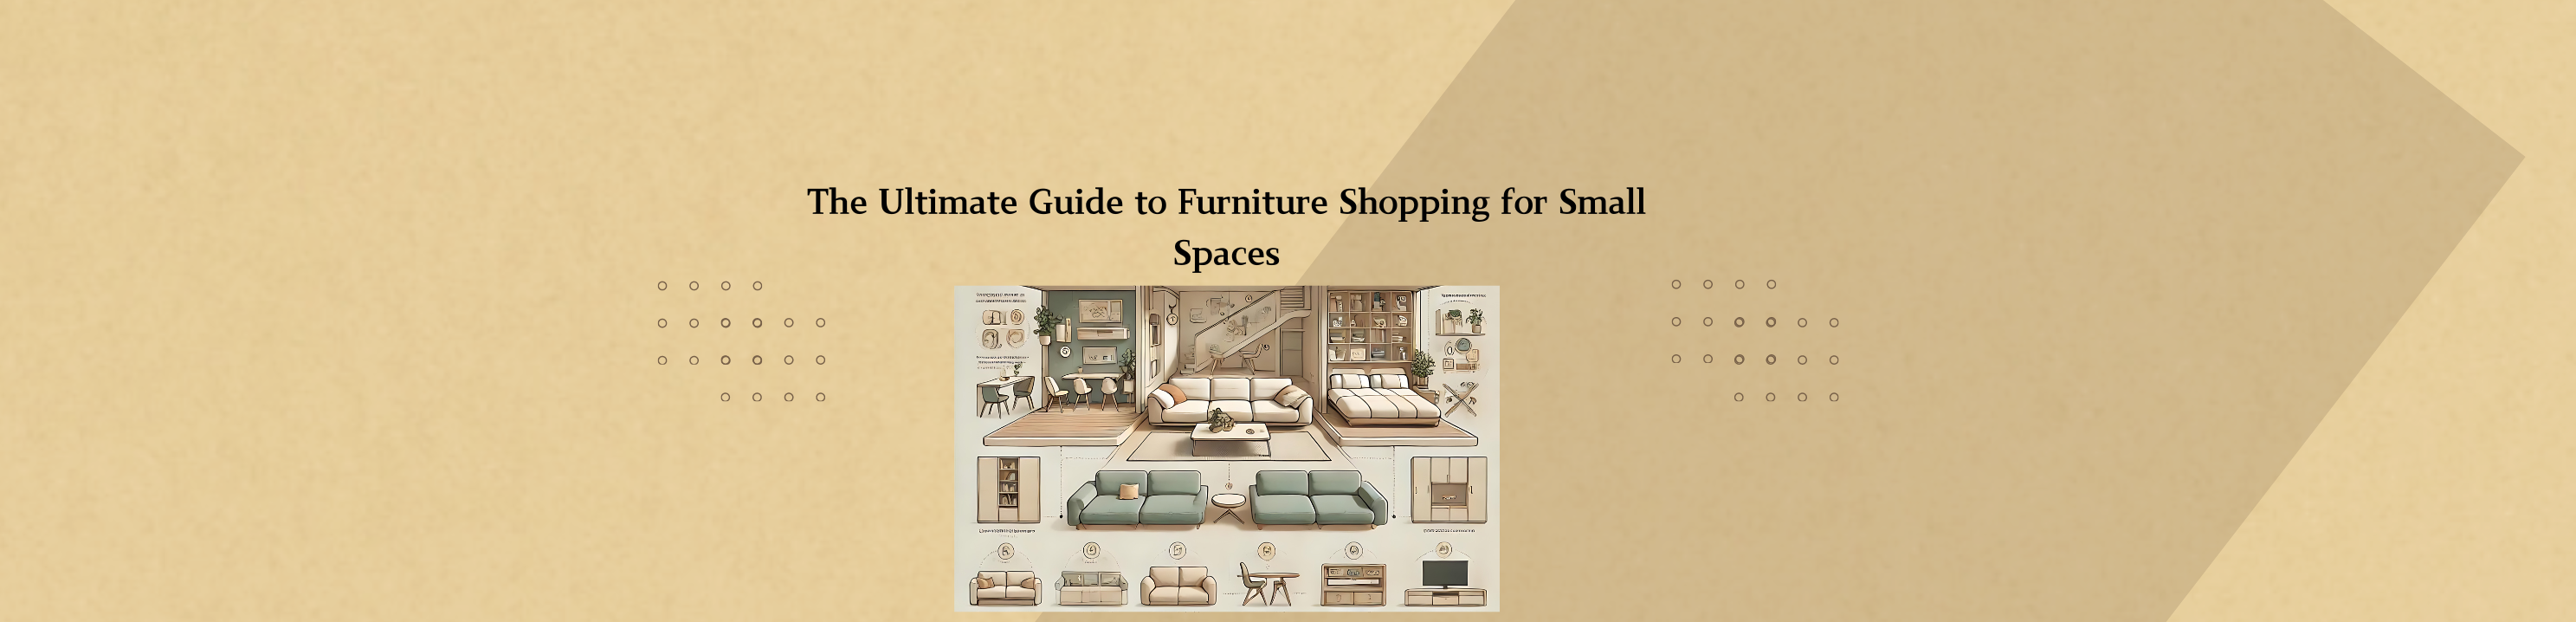 The Ultimate Guide to Furniture Shopping for Small Spaces